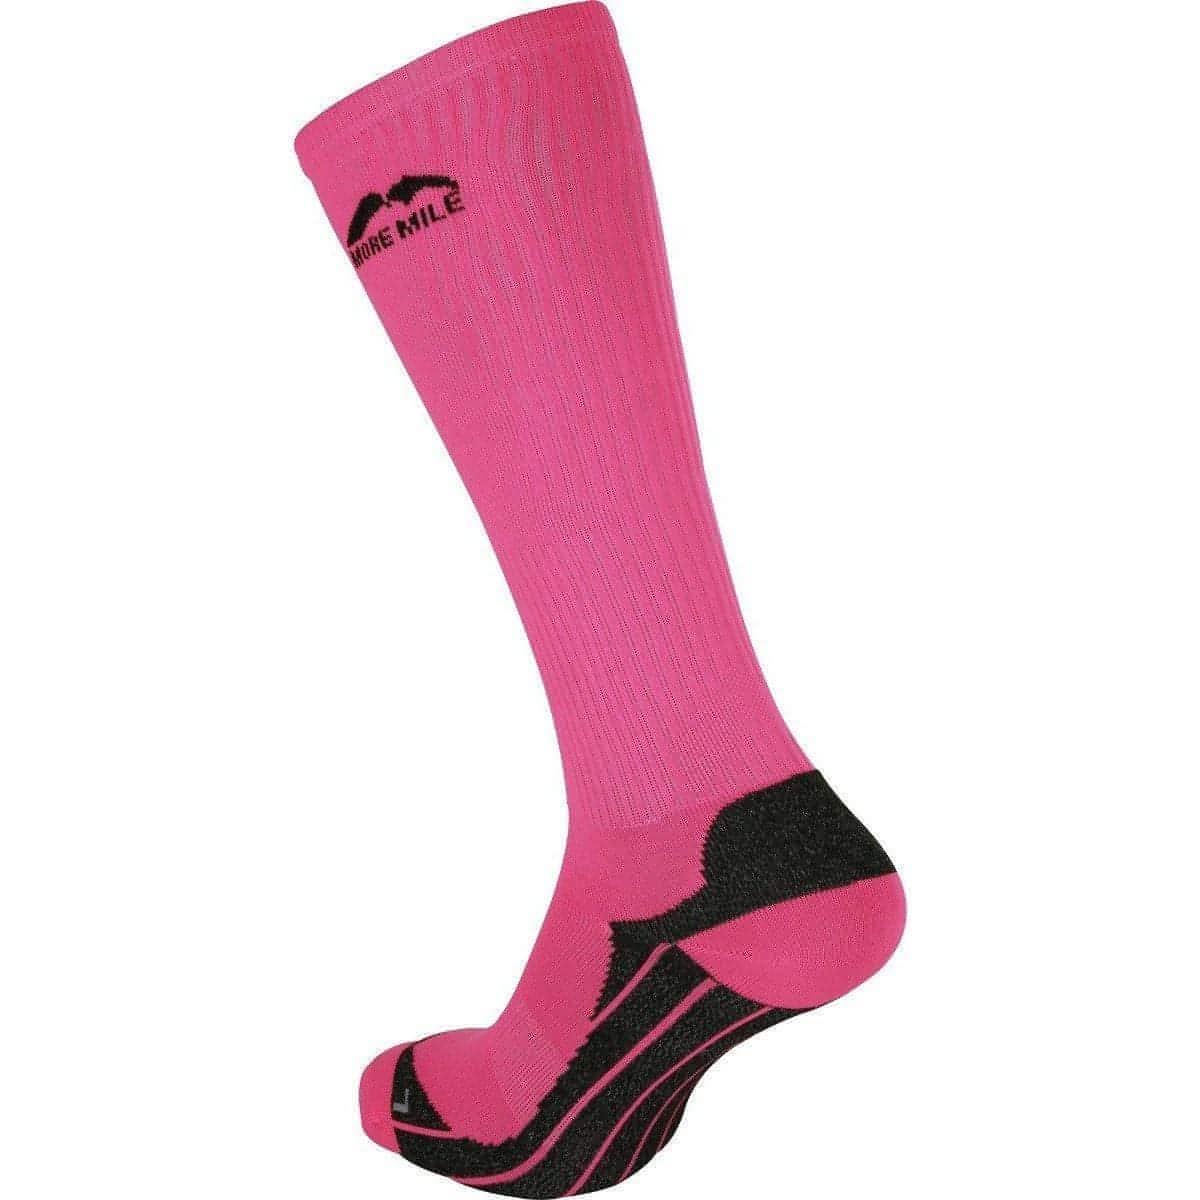 More Mile California (2 Pack) Compression Socks - Green-Pink - Start Fitness